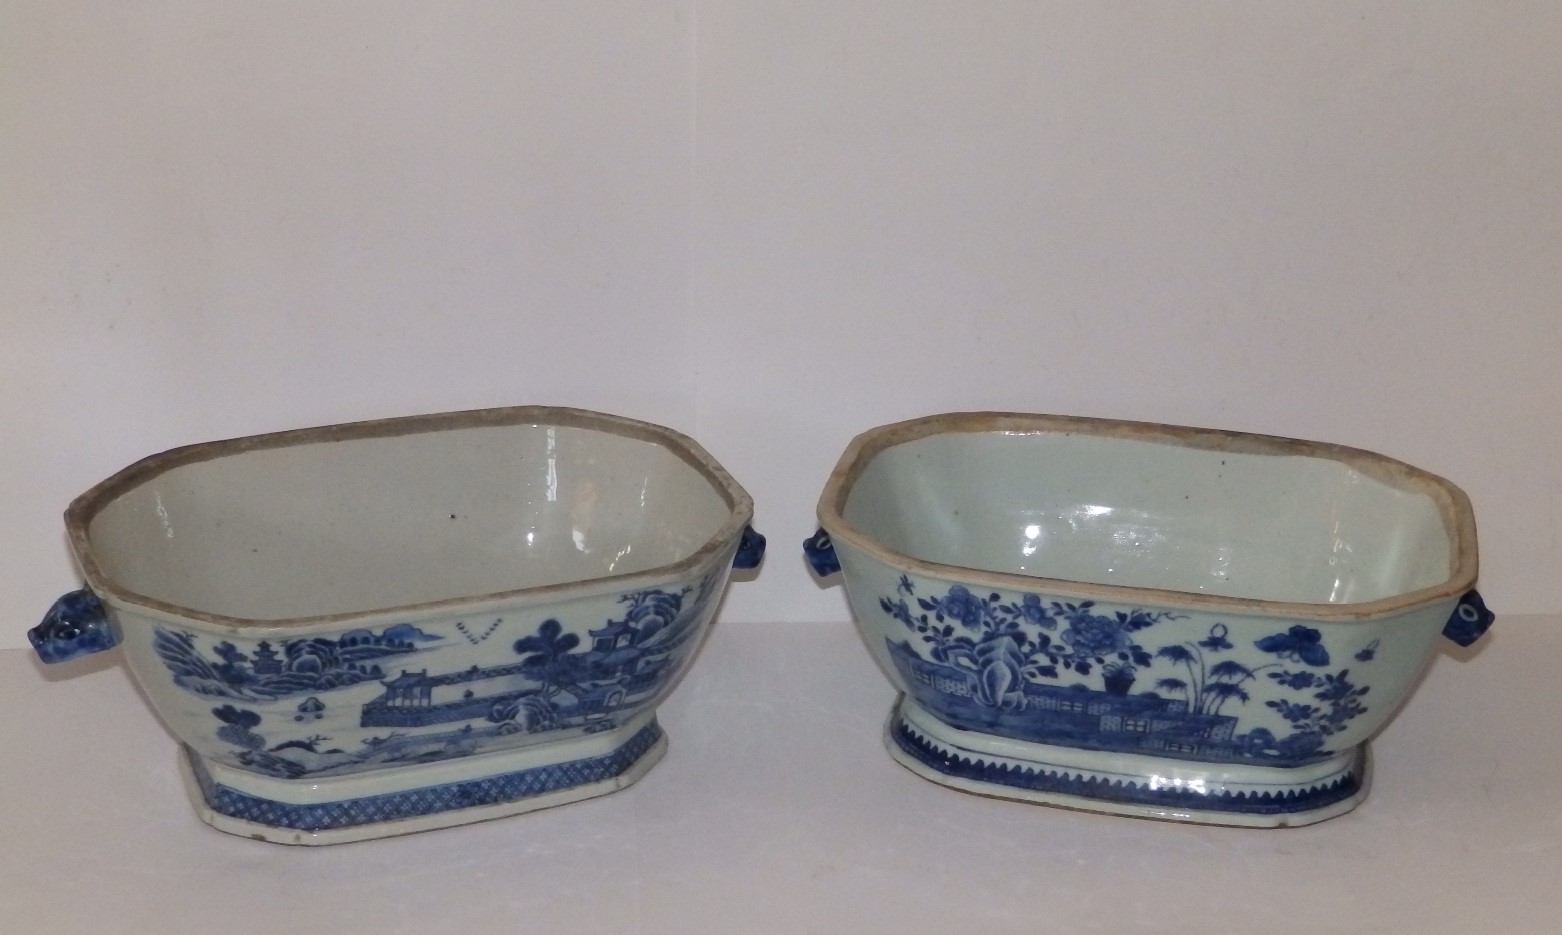 Two late 18th/early 19thC Chinese blue & white porcelain tureen bases, each of canted rectangular